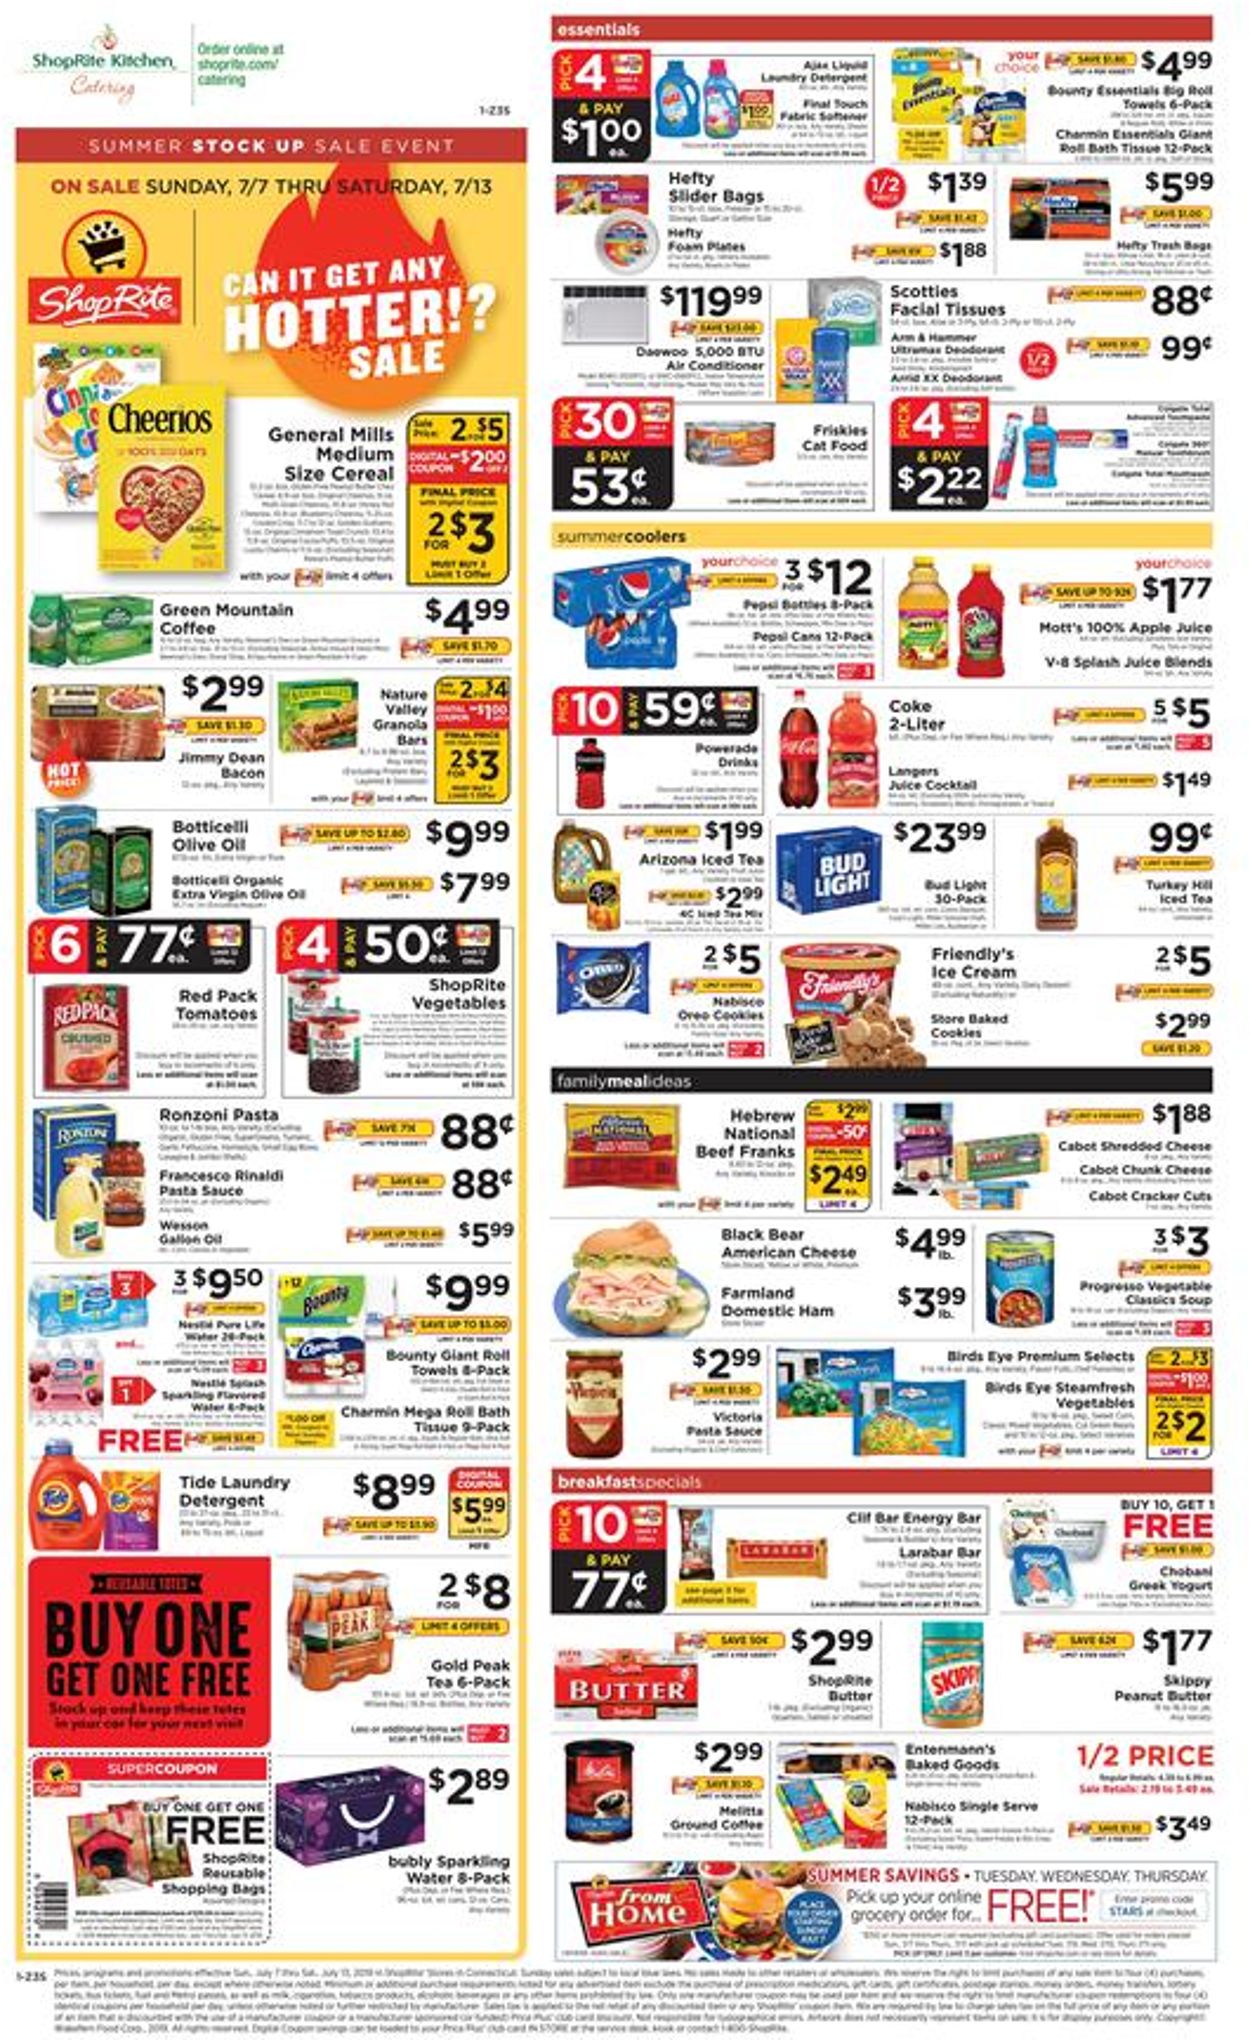 ShopRite Current weekly ad 07/07 - 07/13/2019 - frequent-ads.com